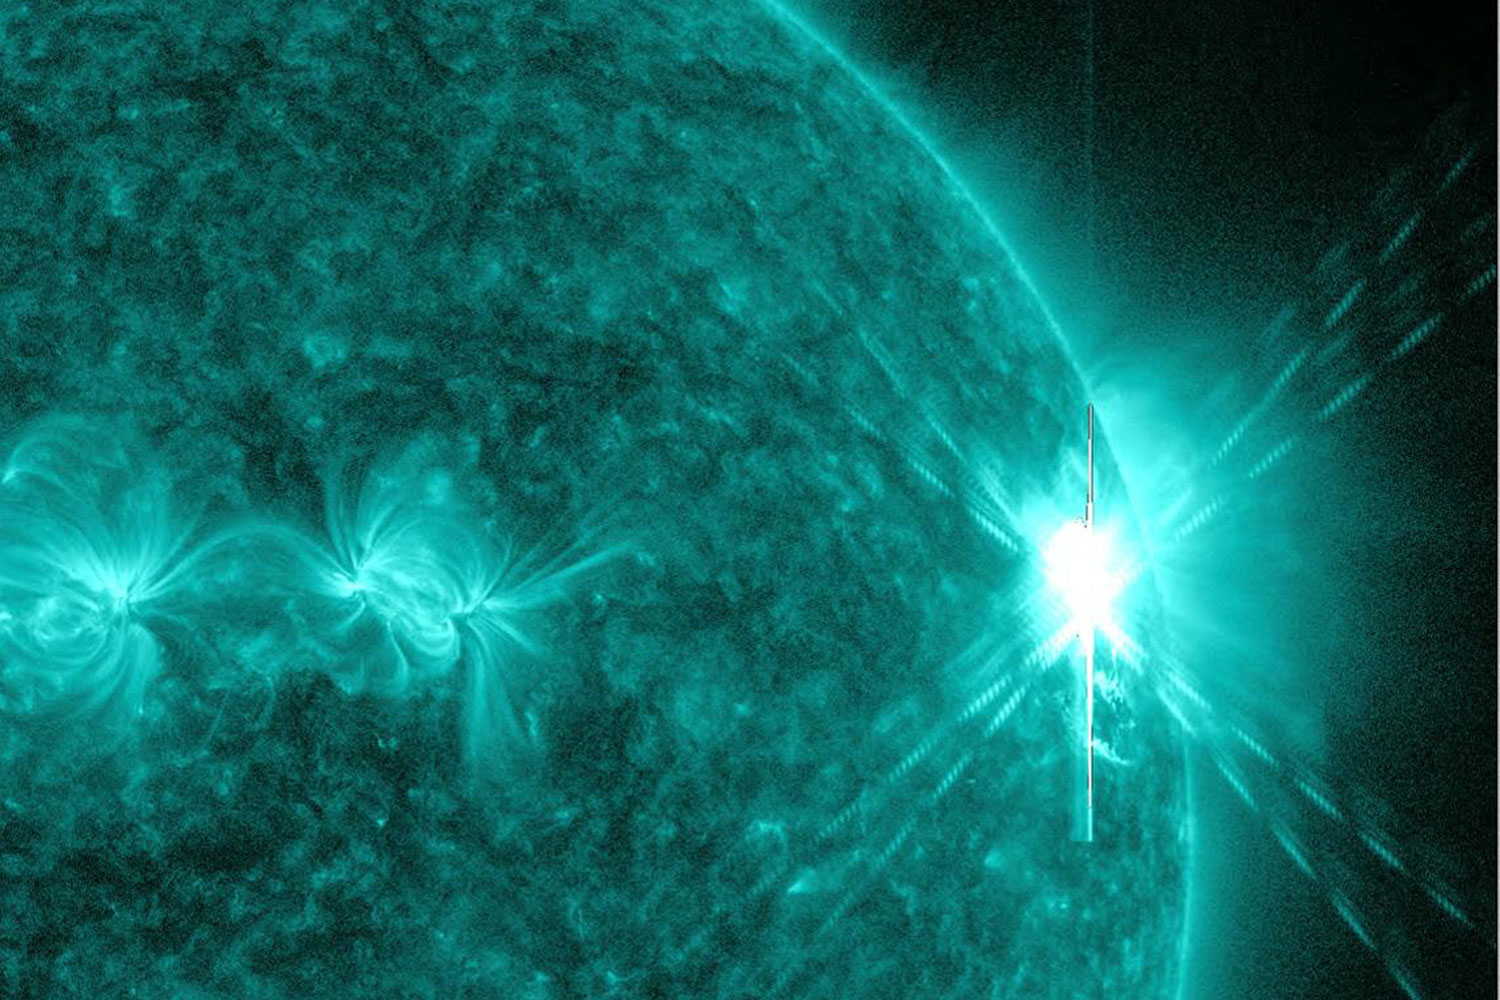 August 9, 2011. An Earth-directed X6.9 flare(R) that began at 3:48 AM EDT, and peaked at 4:05 AM EDT. The flare burst from sun spot region AR11263, before it rotated out of view. These gigantic bursts of radiation cannot pass through Earth's atmosphere to harm humans on the ground, however they can disrupt the atmosphere and disrupt GPS and communications signals. The flare is strong enough to potentially cause some radio communication blackouts. It also produced increased solar energetic proton radiation — enough to affect humans in space if they do not protect themselves. This image is from the beginning of the event just before the satellite sensors were overwhelmed by energetic particles.